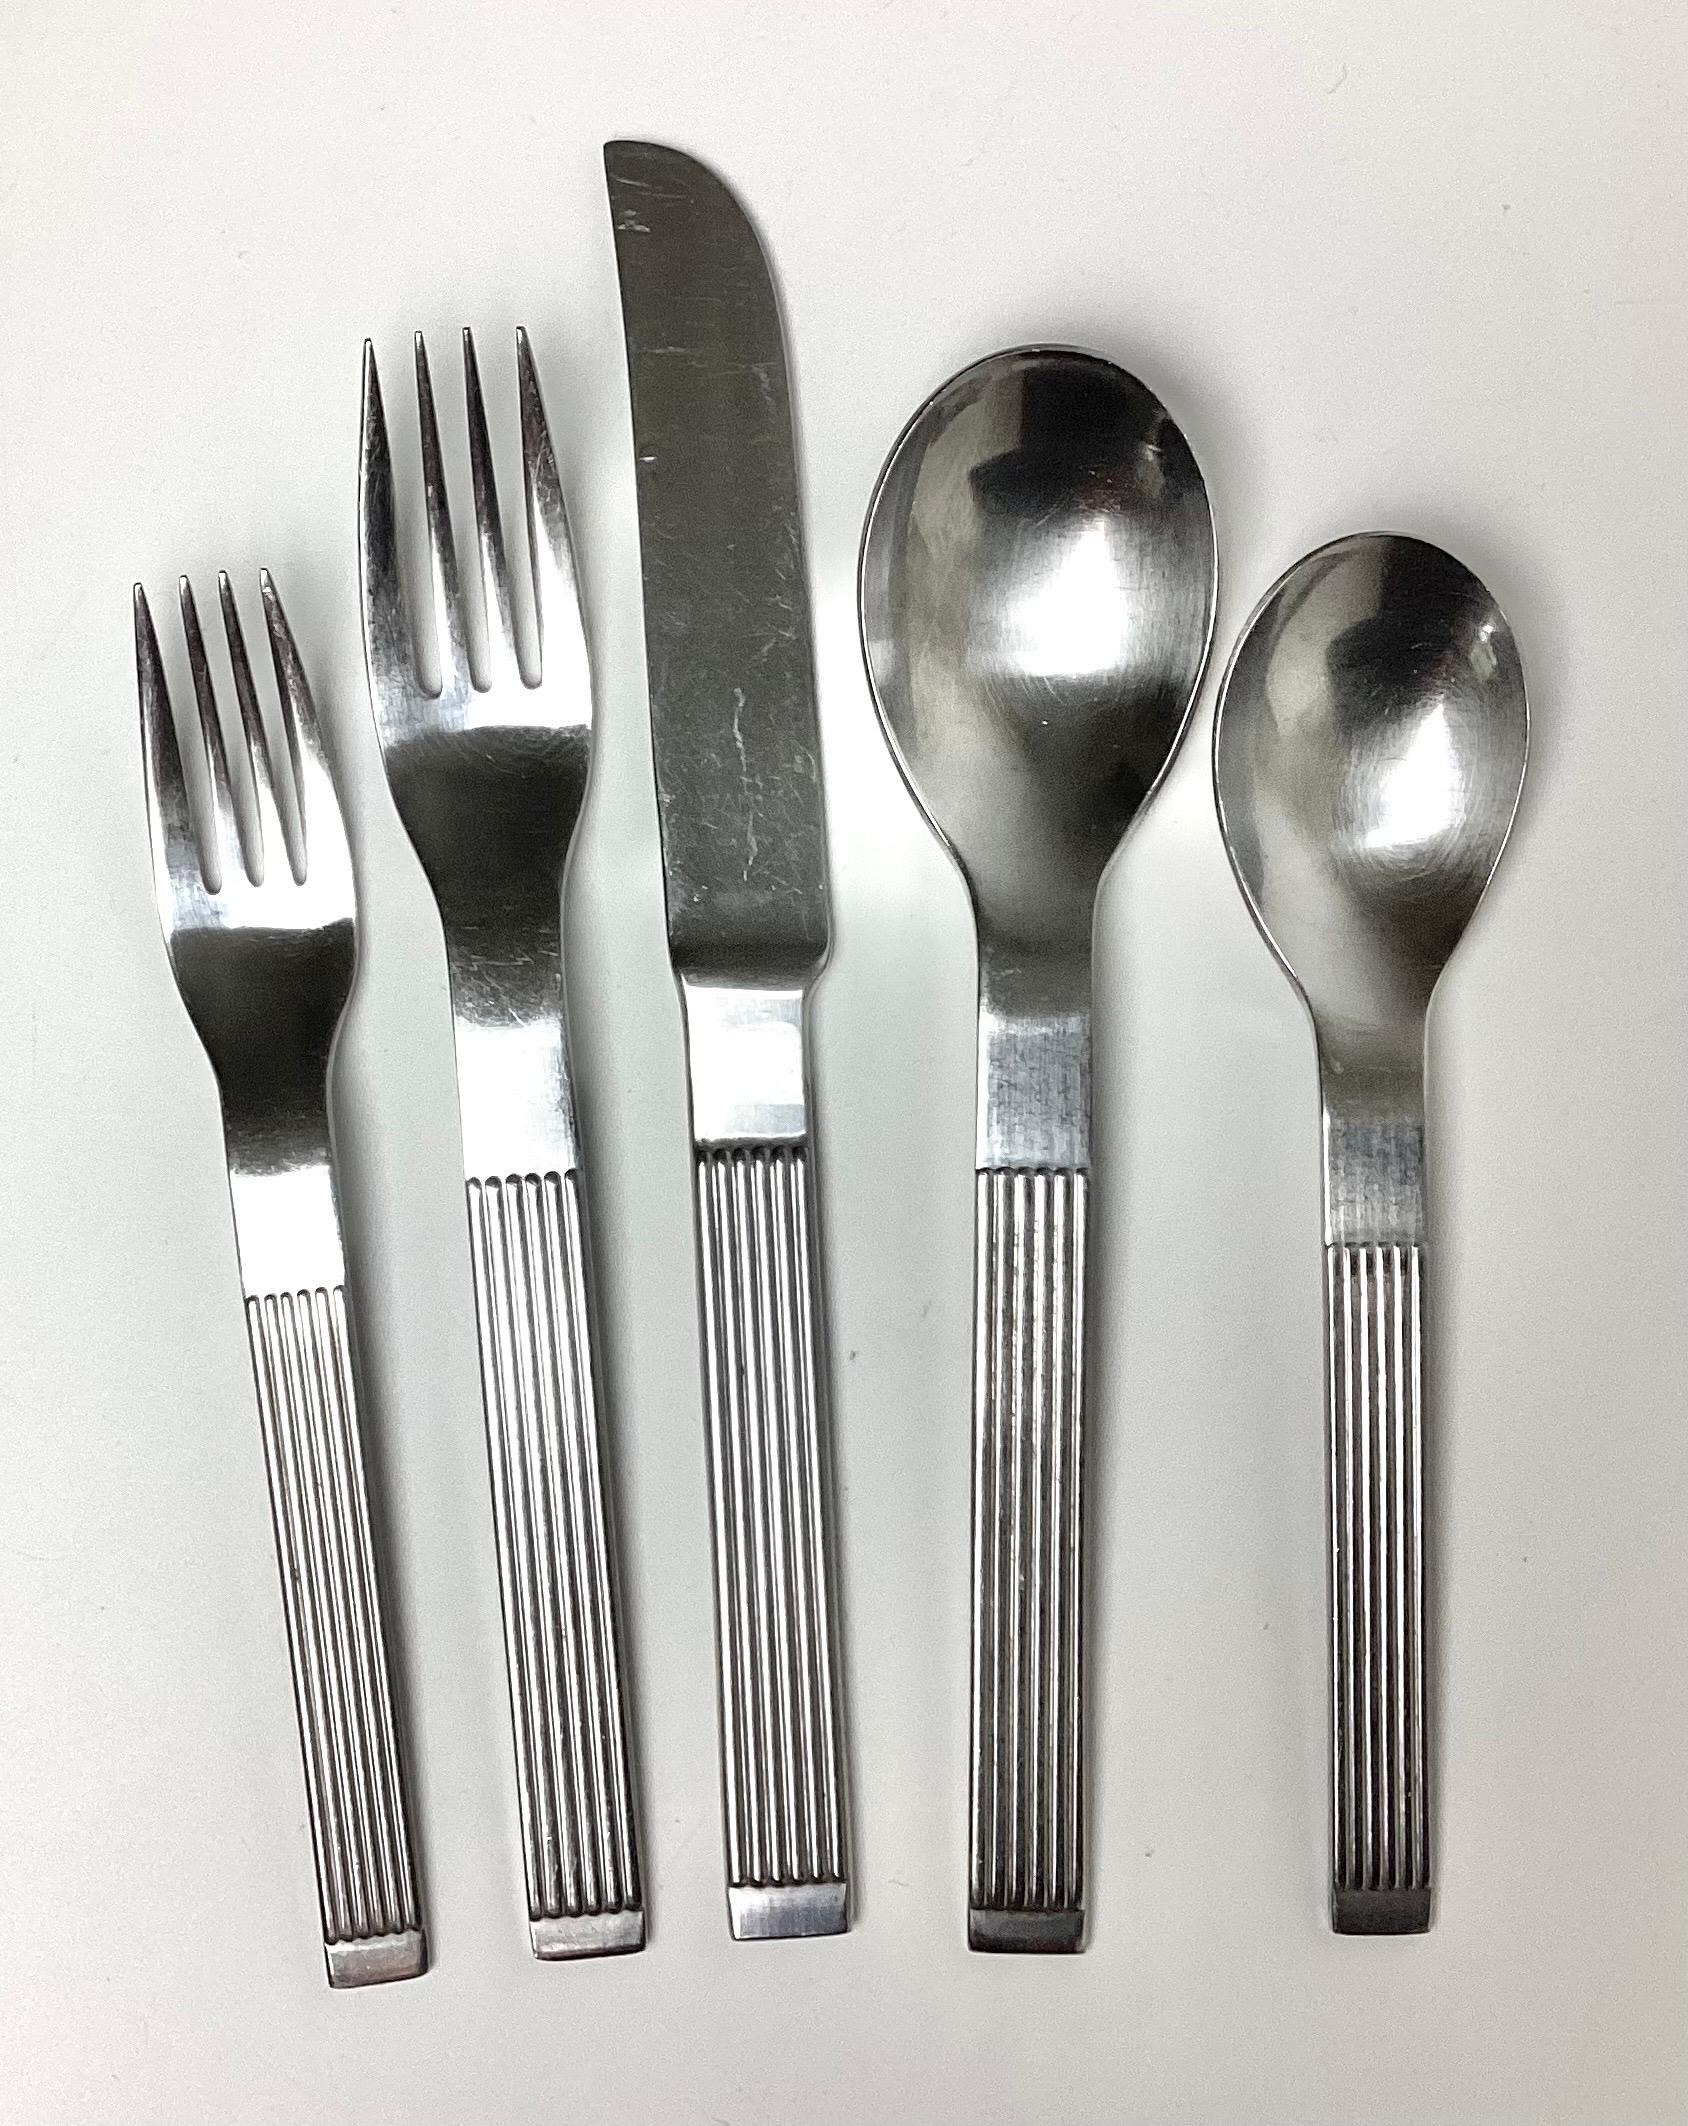 31 Piece Modern THEBE by Dansk stainless steel flatware set. Some pieces are marked Japan others Korea. Age appropriate wear. 6 Dinner Knifes, 7 dinner forces, 5 salad forks, 6 larger or soup spoons, and 7 tea spoons.